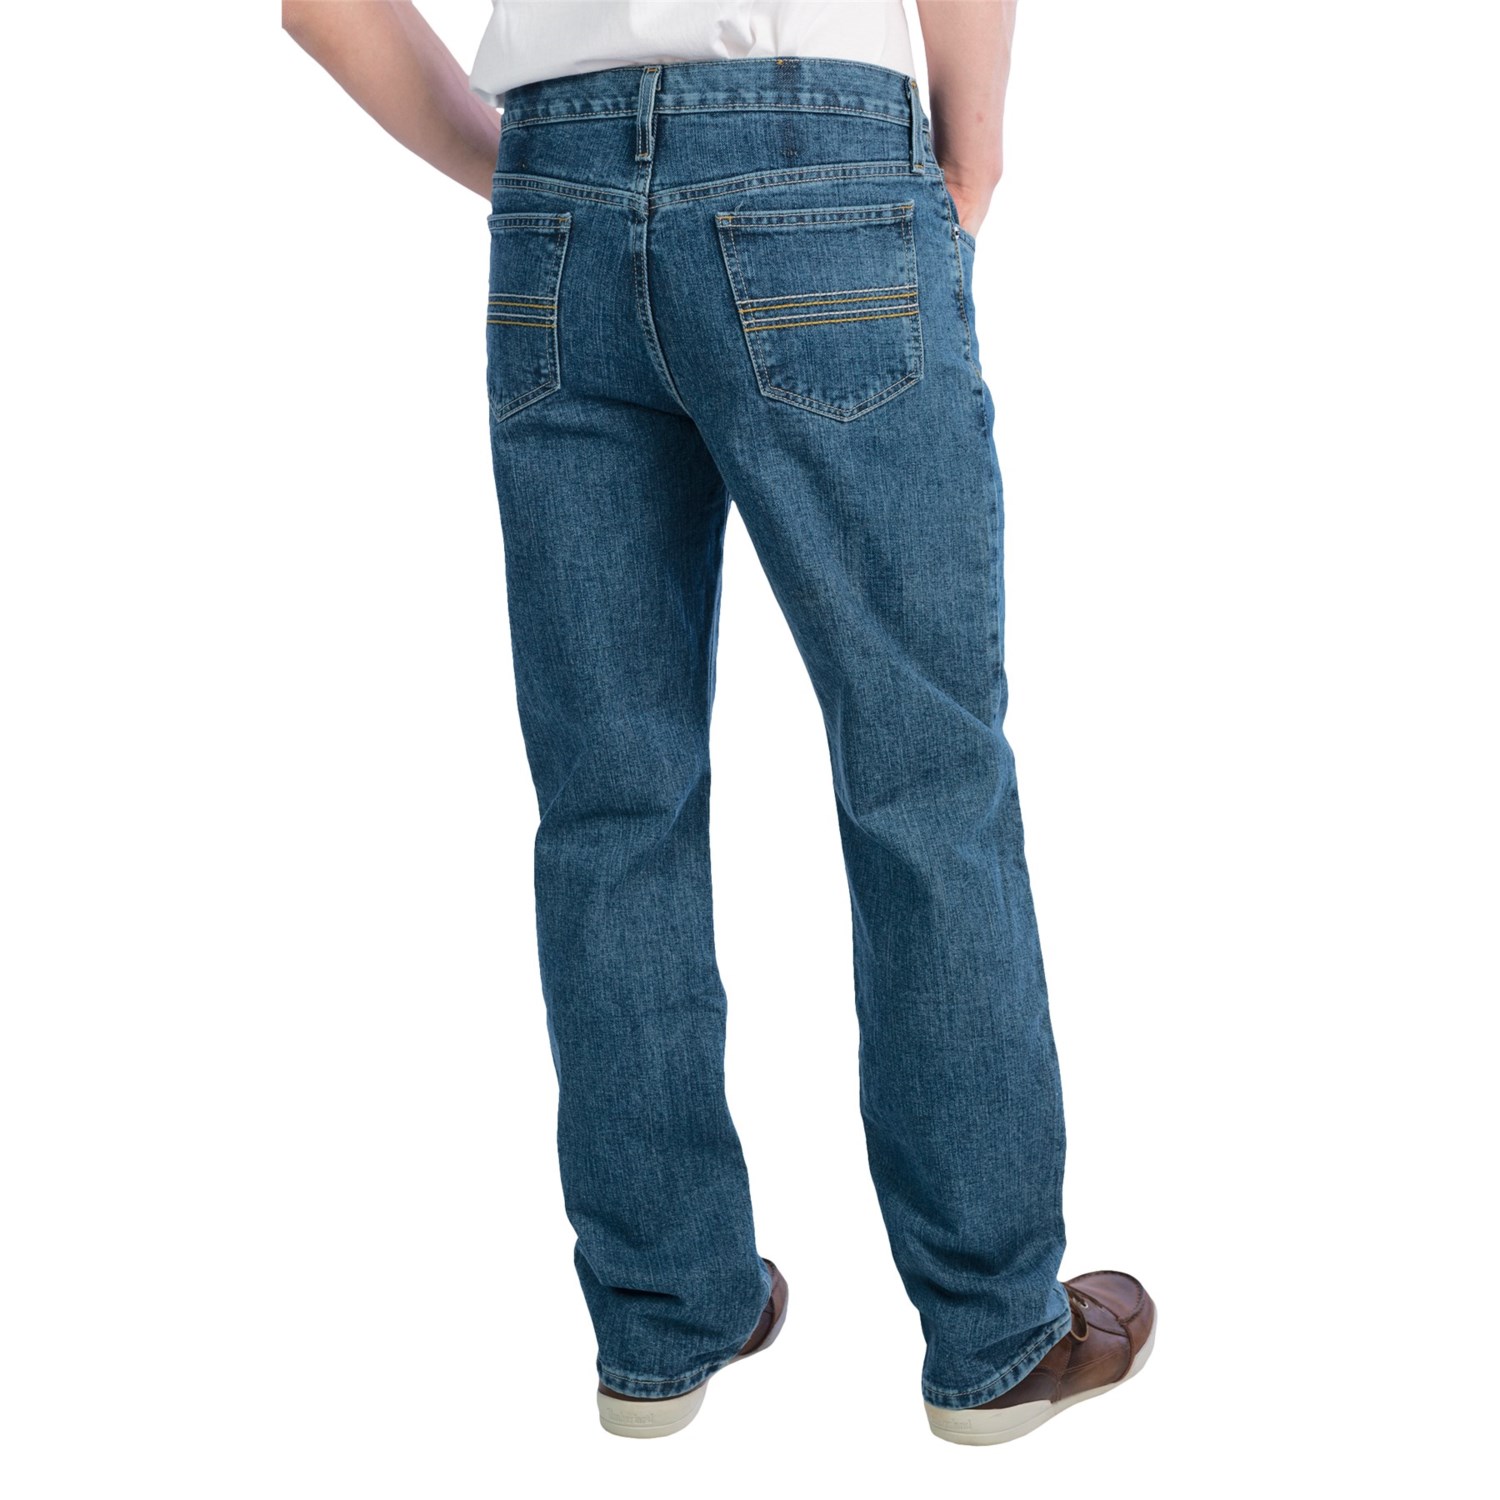 Cinch Silver Label Jeans (For Men) - Save 67%